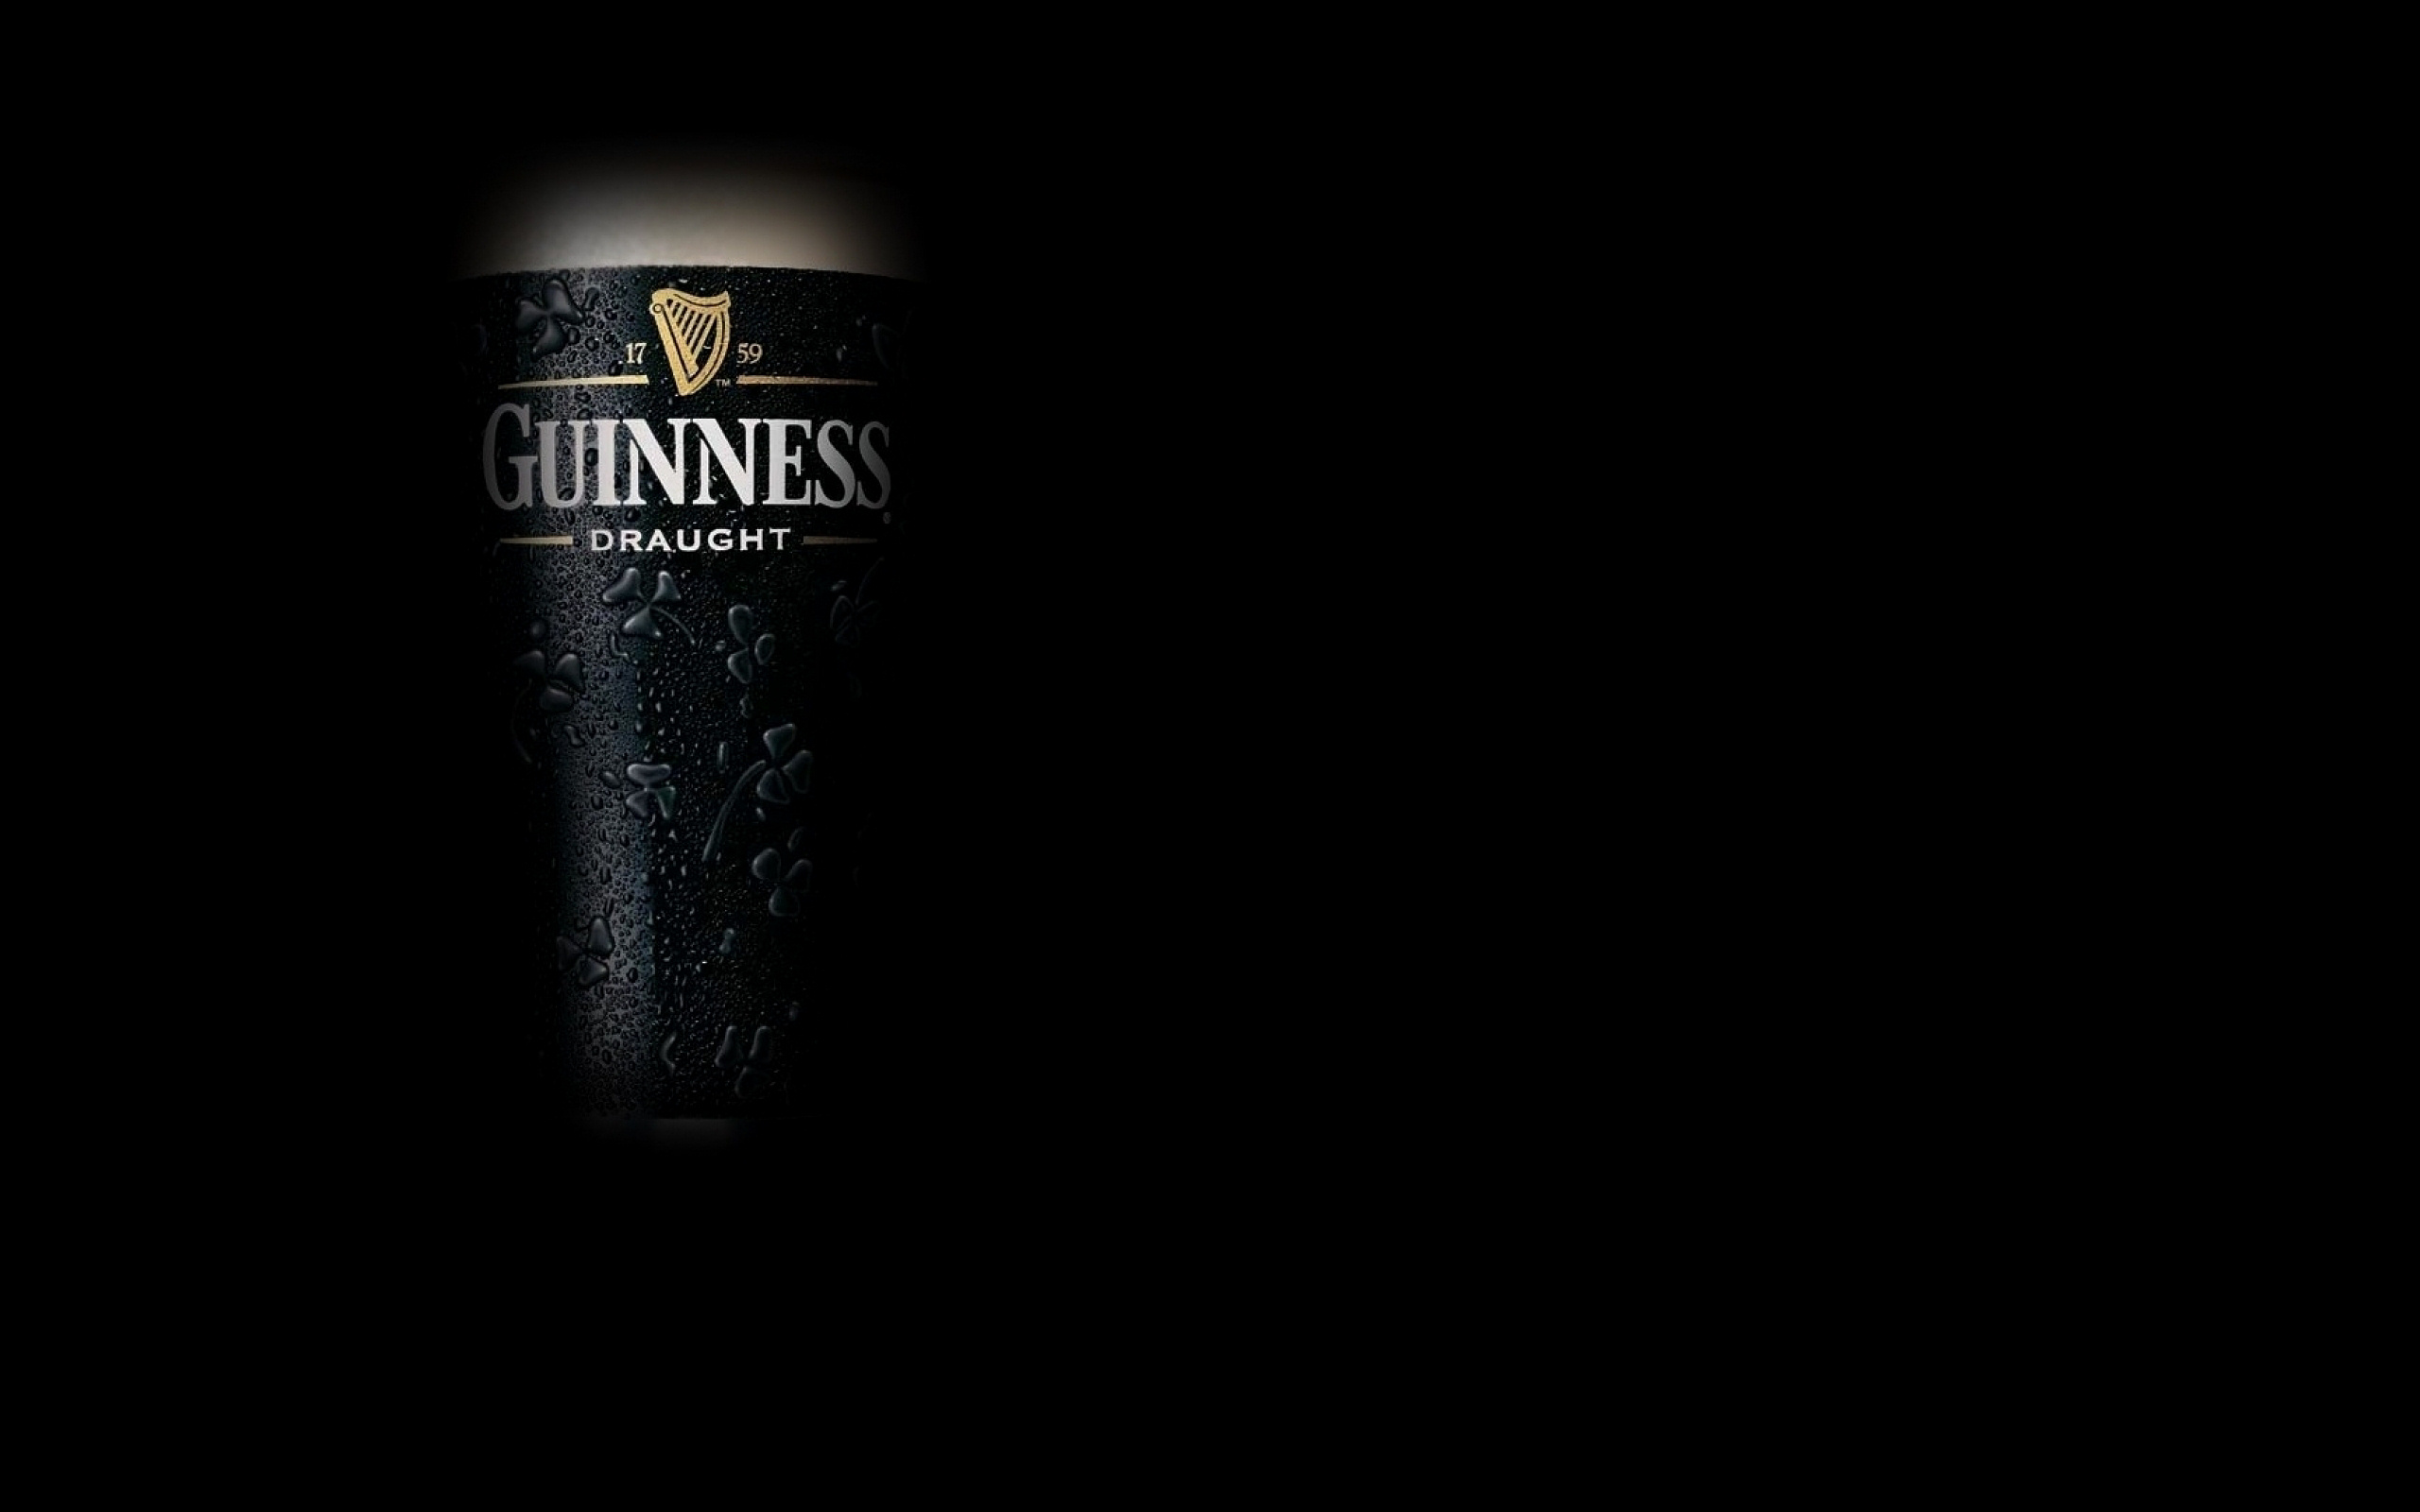 guinness, beer, products